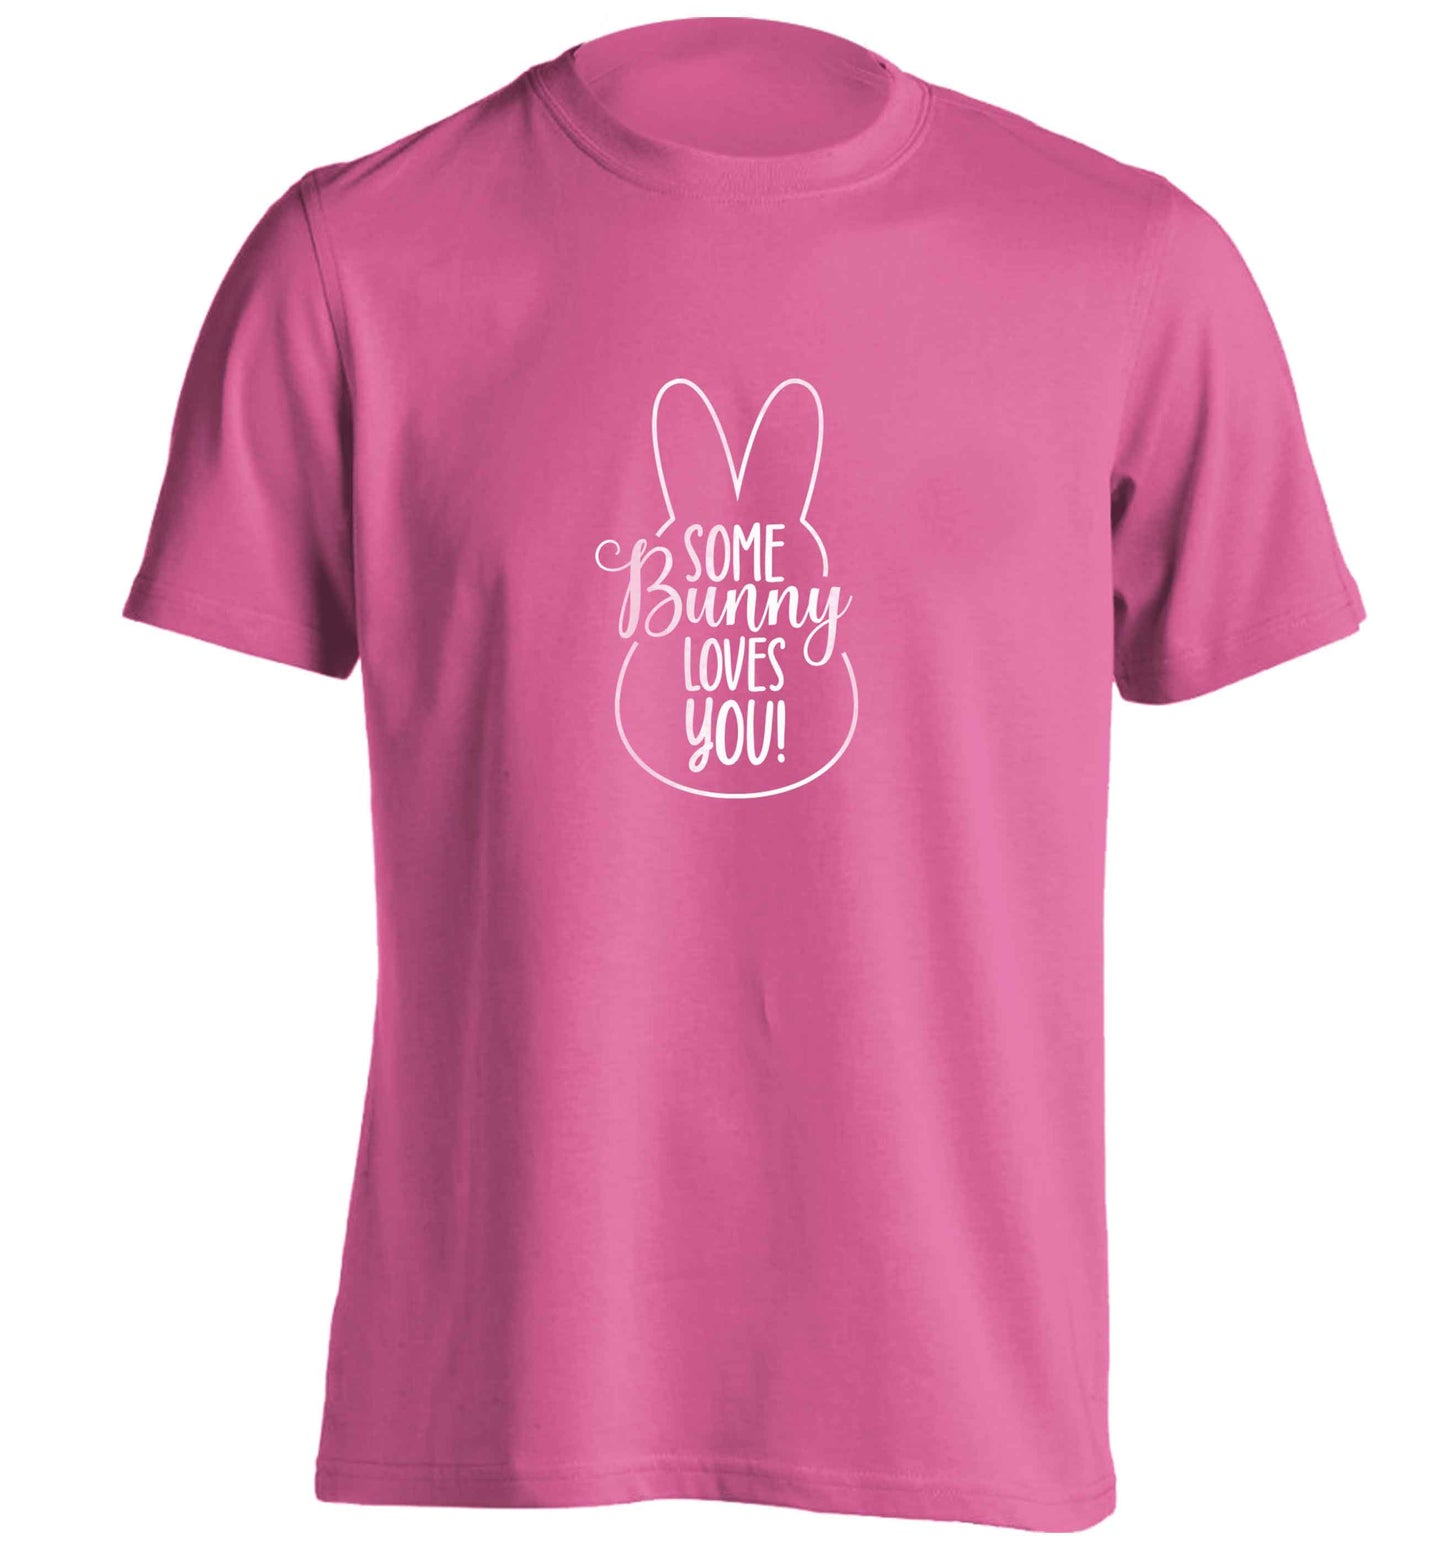 Some bunny loves you adults unisex pink Tshirt 2XL